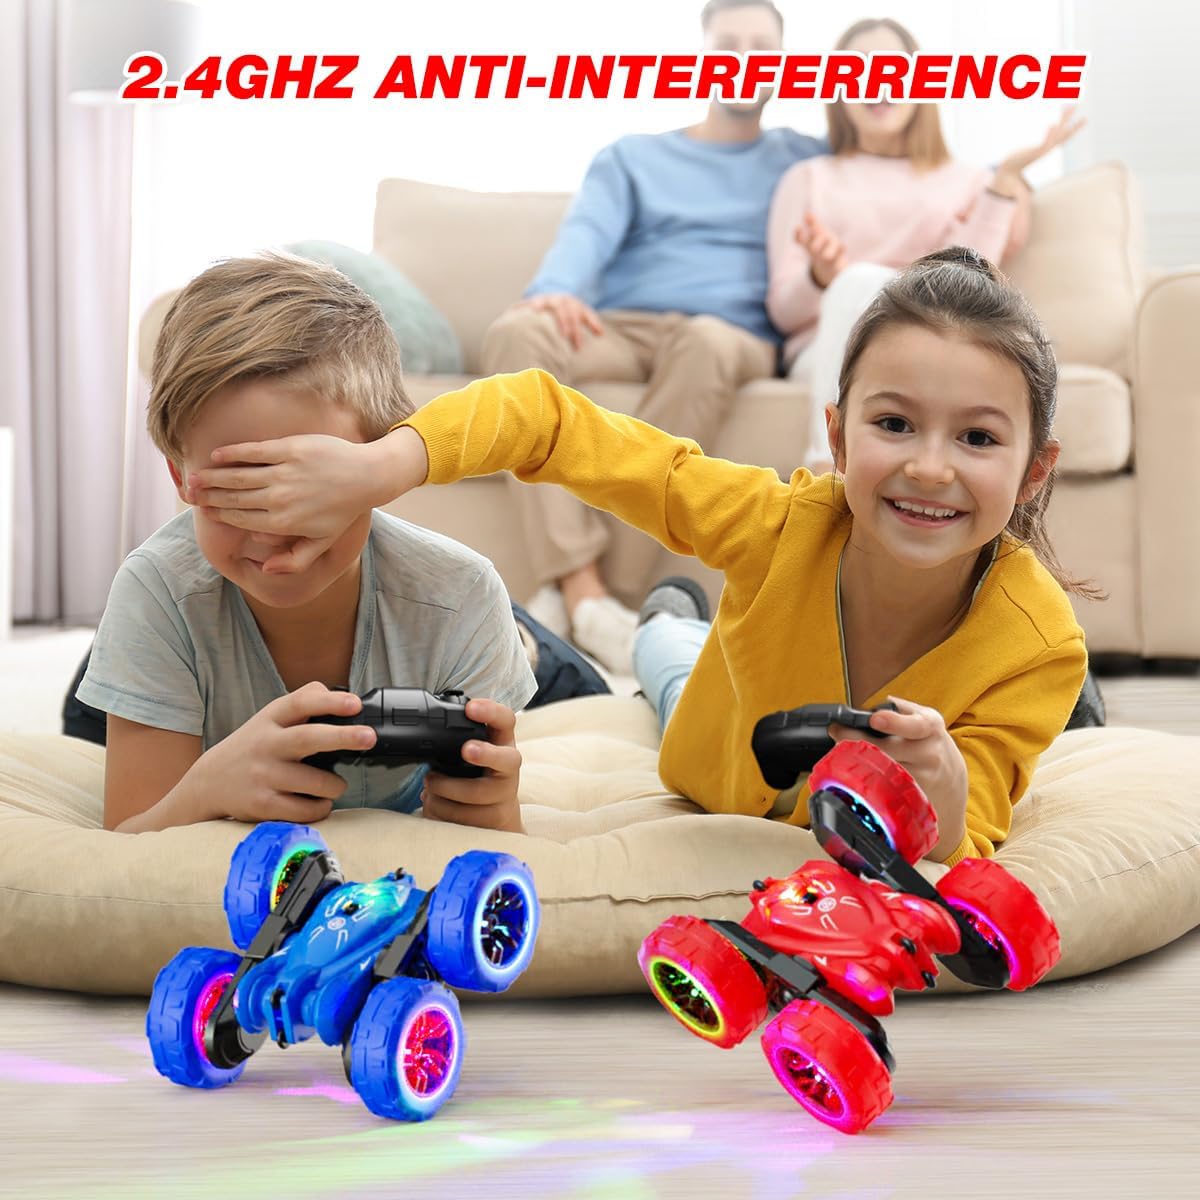 Upgraded Remote Control Car, Rechargeable RC Cars Toy All Terrain Off Road 4WD Double Sided Running Crawler, 360° Rotation & Flips 2.4GHz RC Stunt Car Birthday Gift for Boys & Girls Aged 3-12